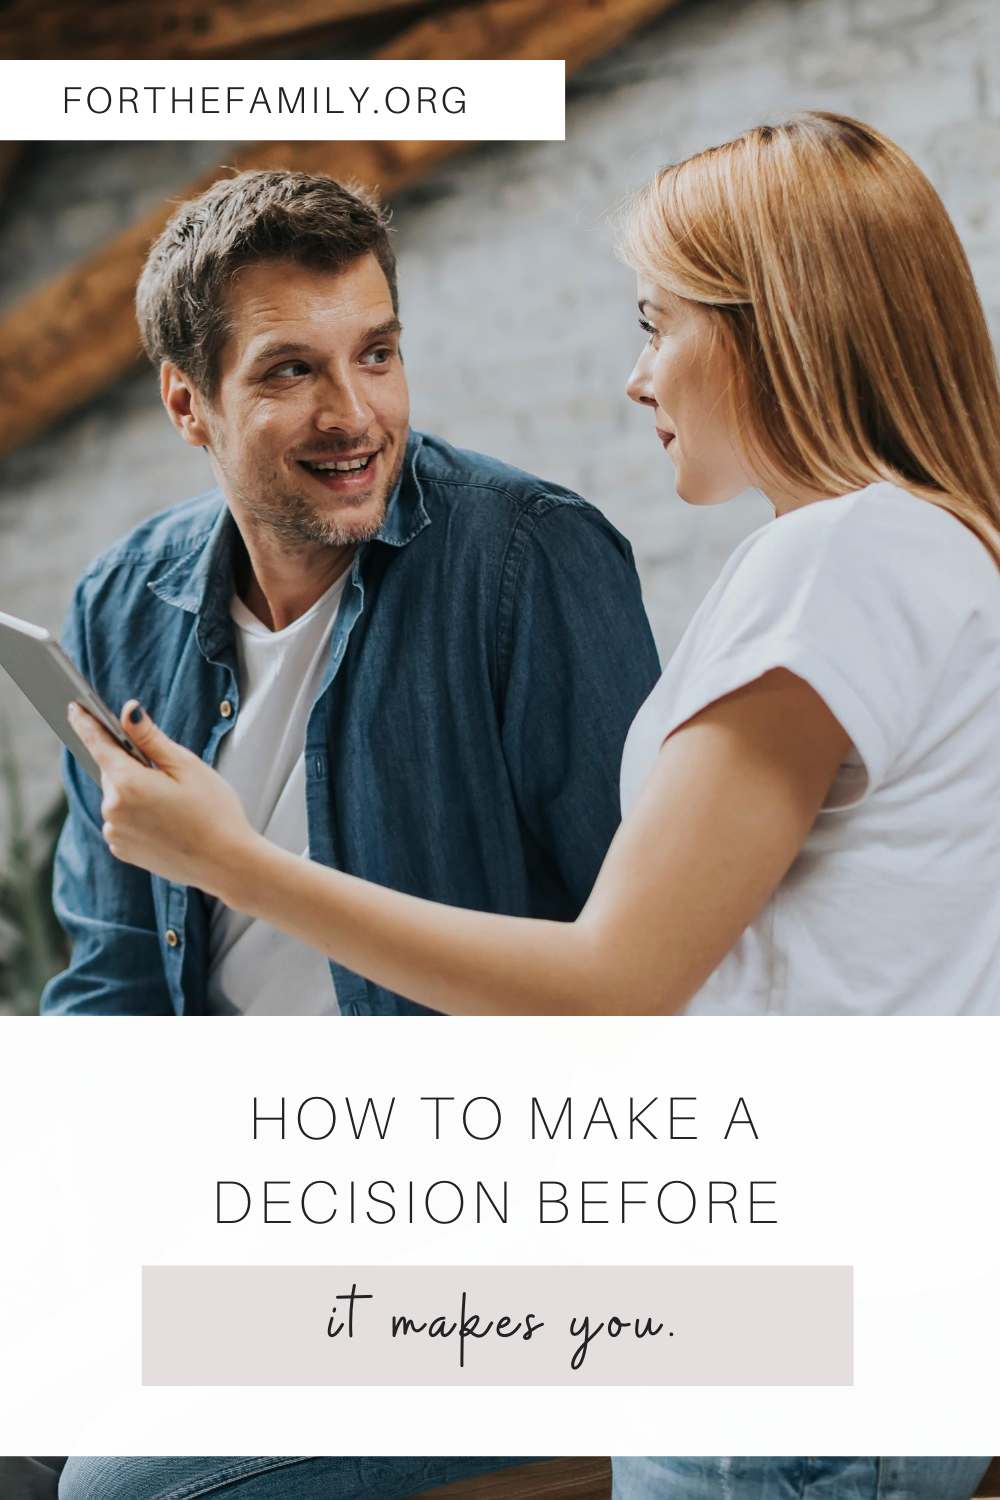 How to make a decision before it makes you. forthefamily.com